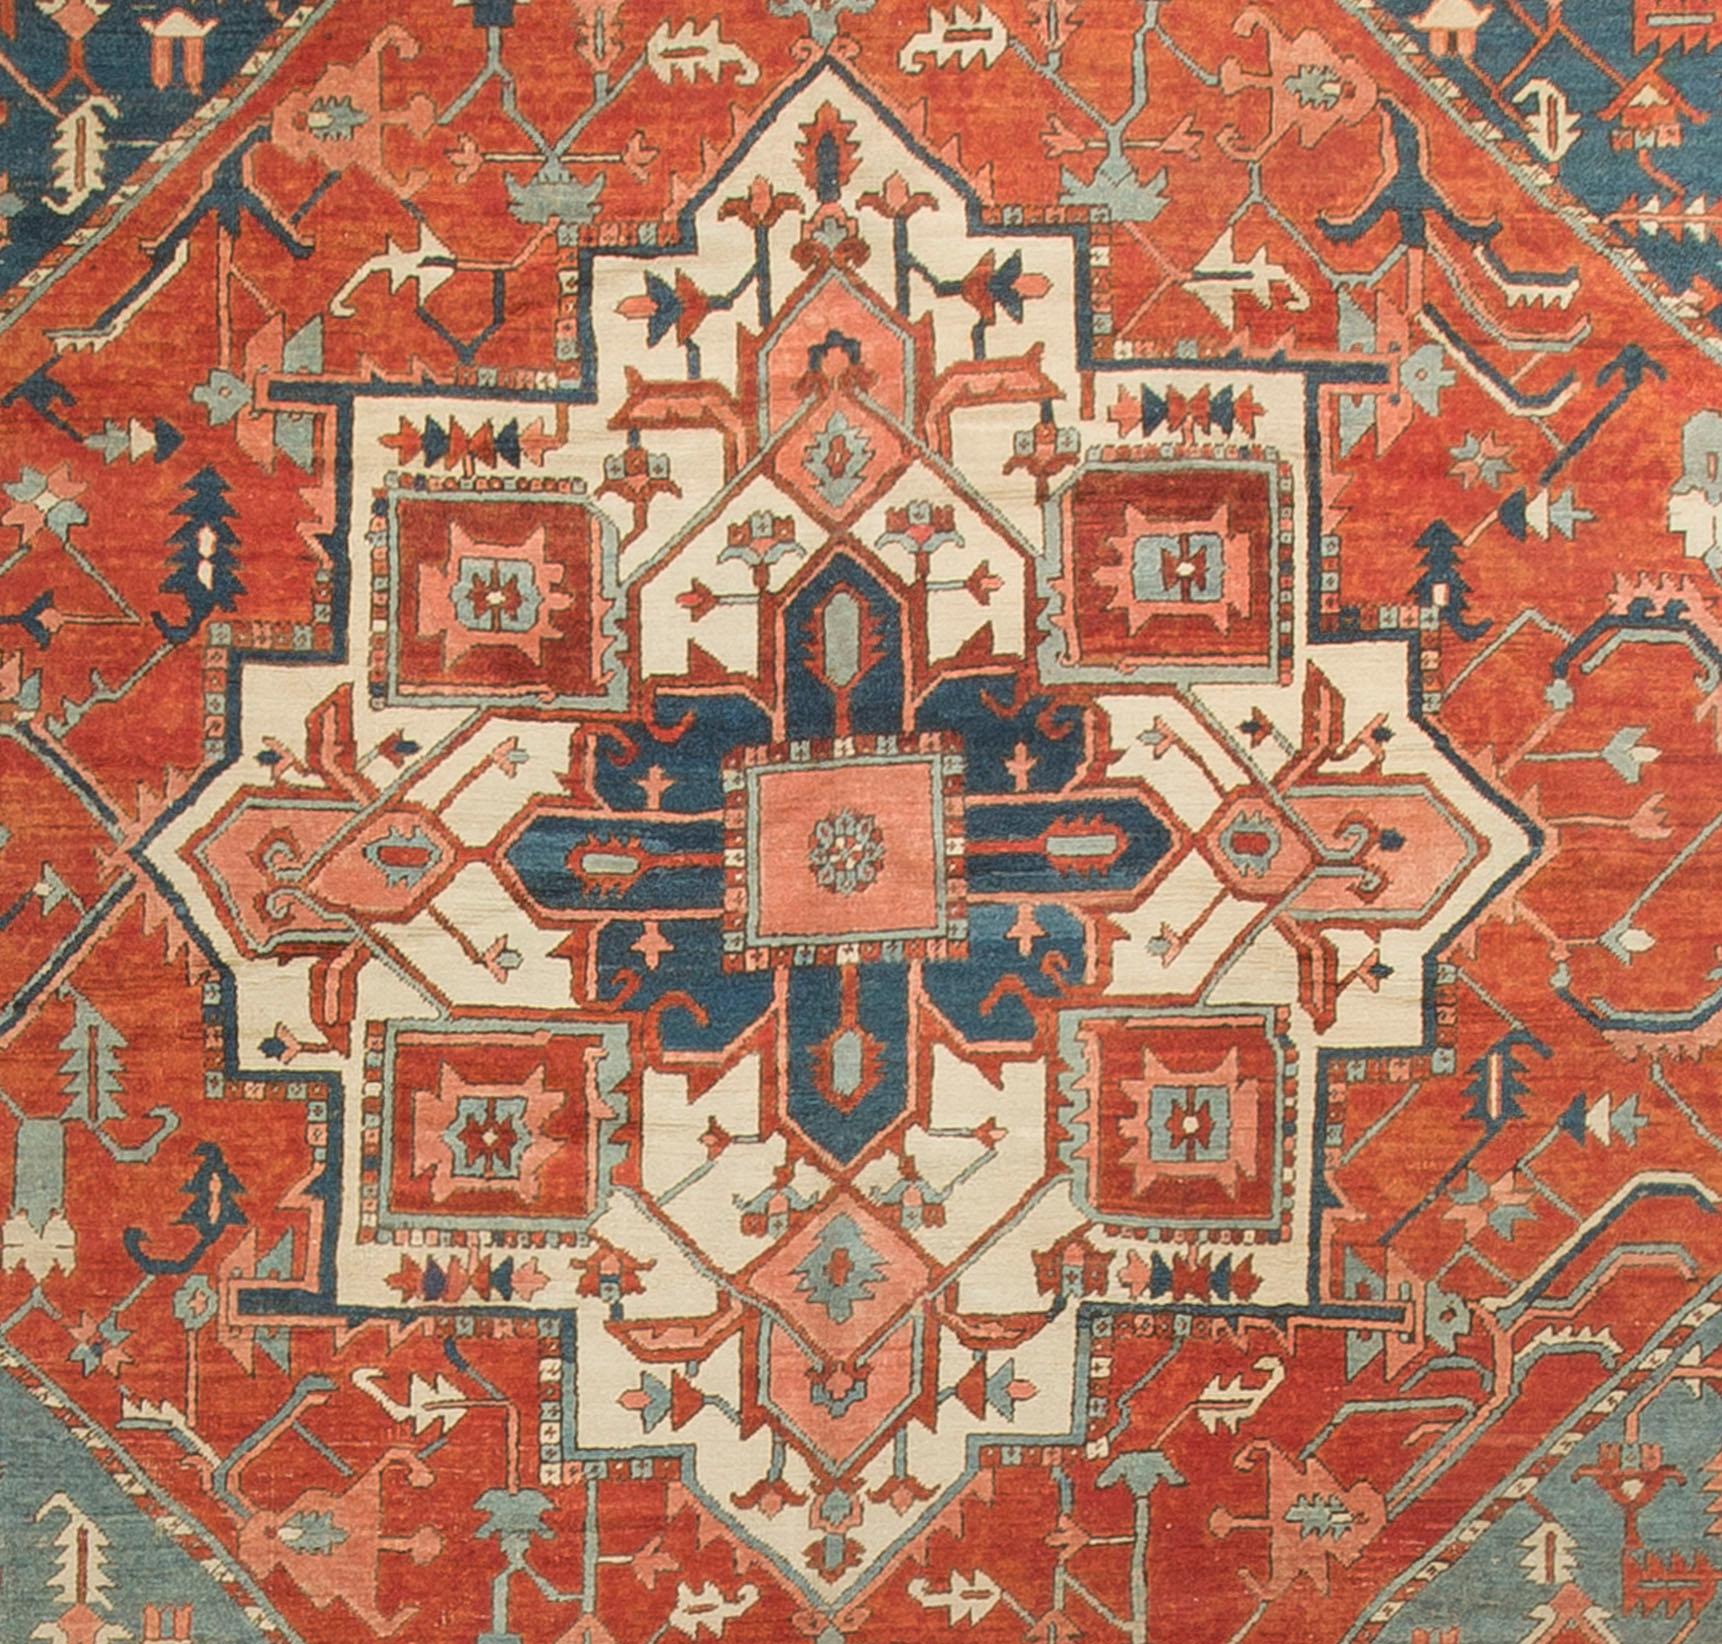 Antique Persian Heriz Rug Carpet Circa 1890. An antique Persian Heriz rug, circa 1890. The central medallion enclosed within a brick colored field with the four corner spandrels showing an abrash or natural color change between dark and light blues.